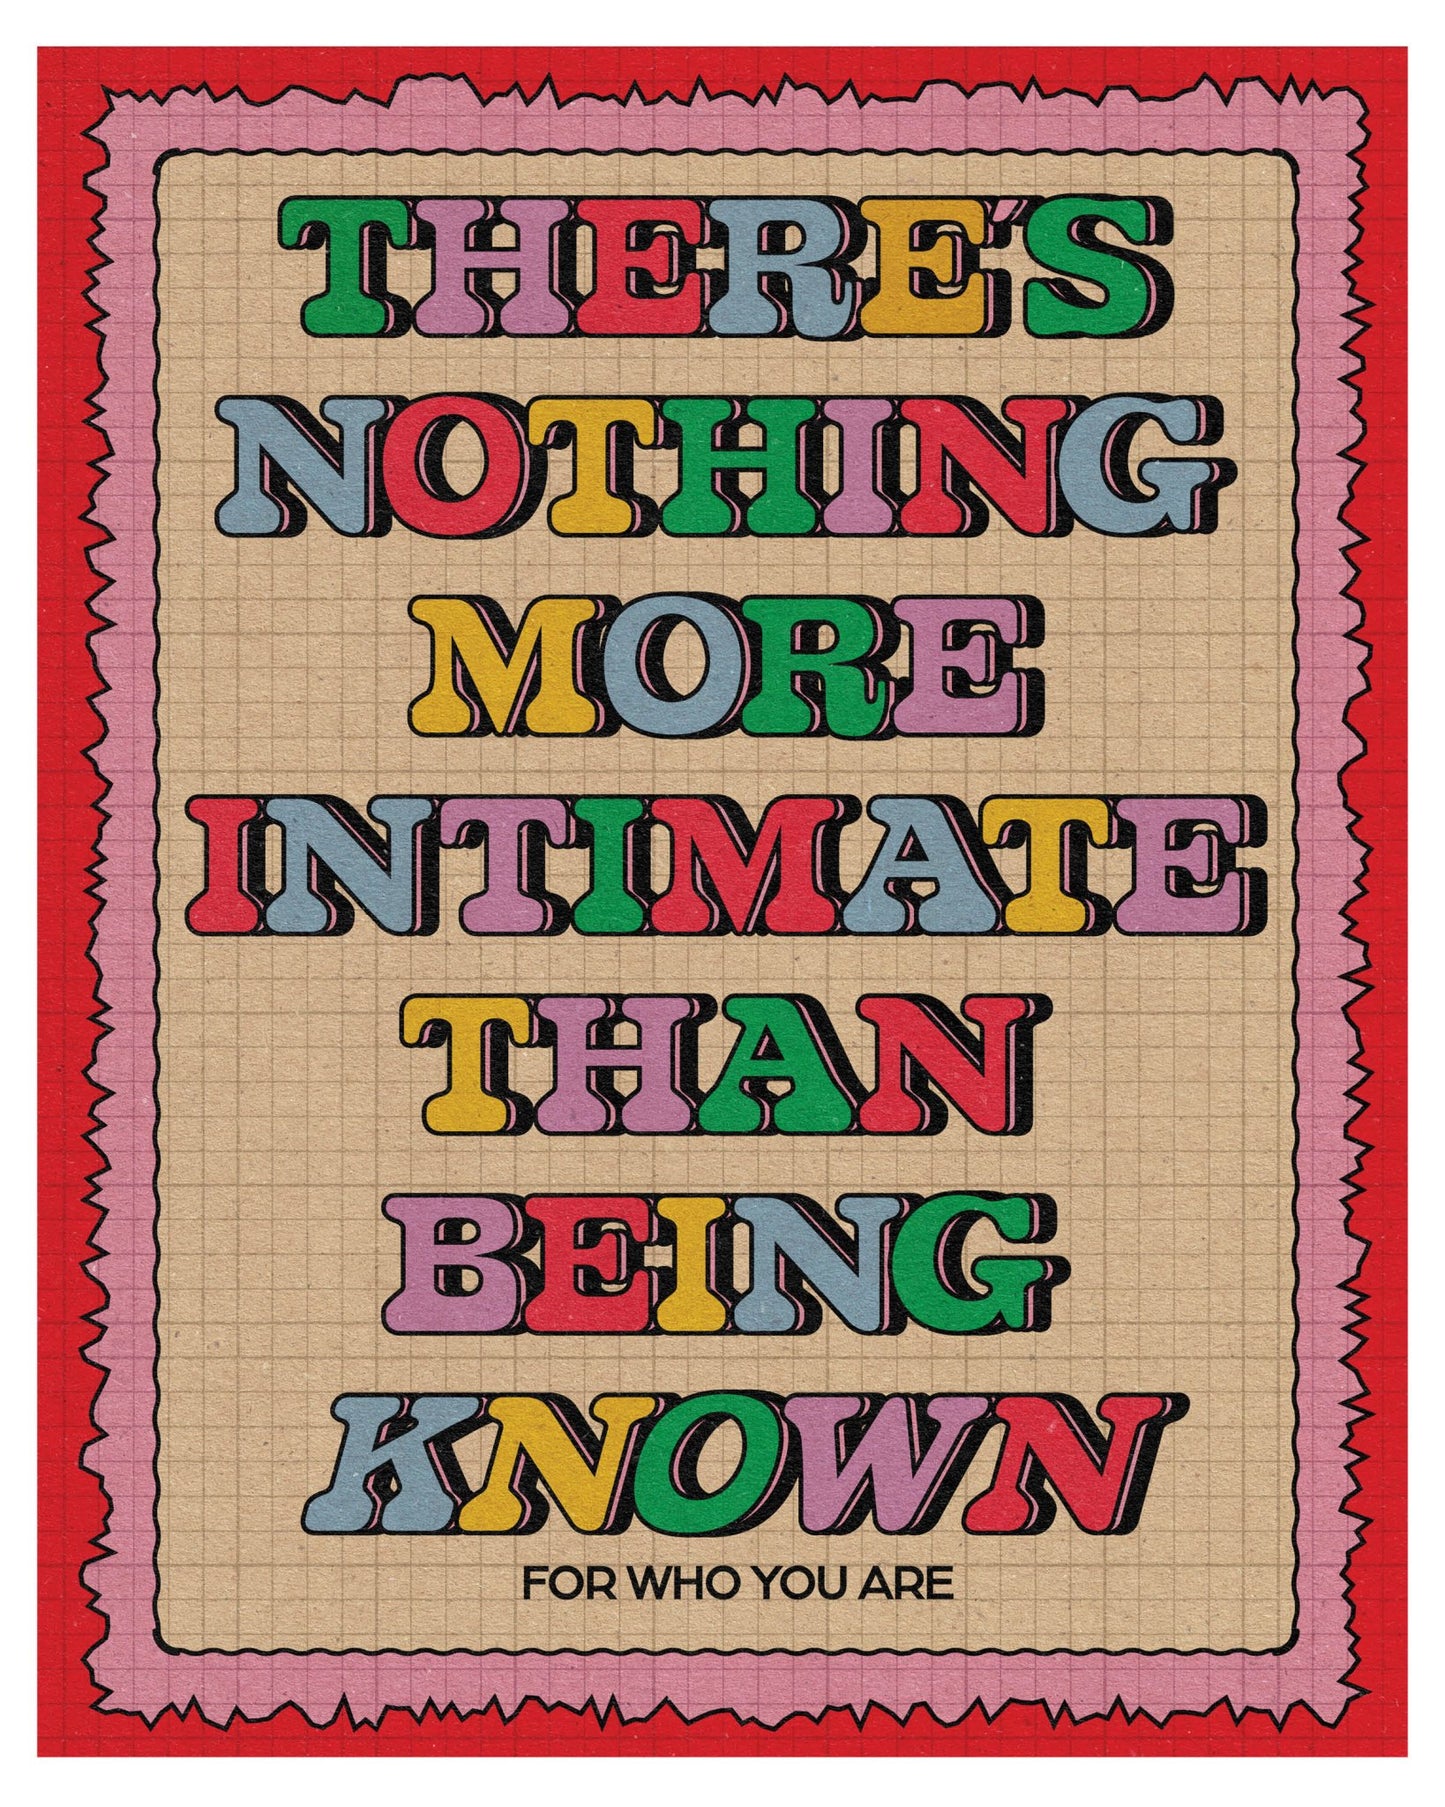 There's nothing more intimate than being known for who you are - art print by Posse Paper Goods